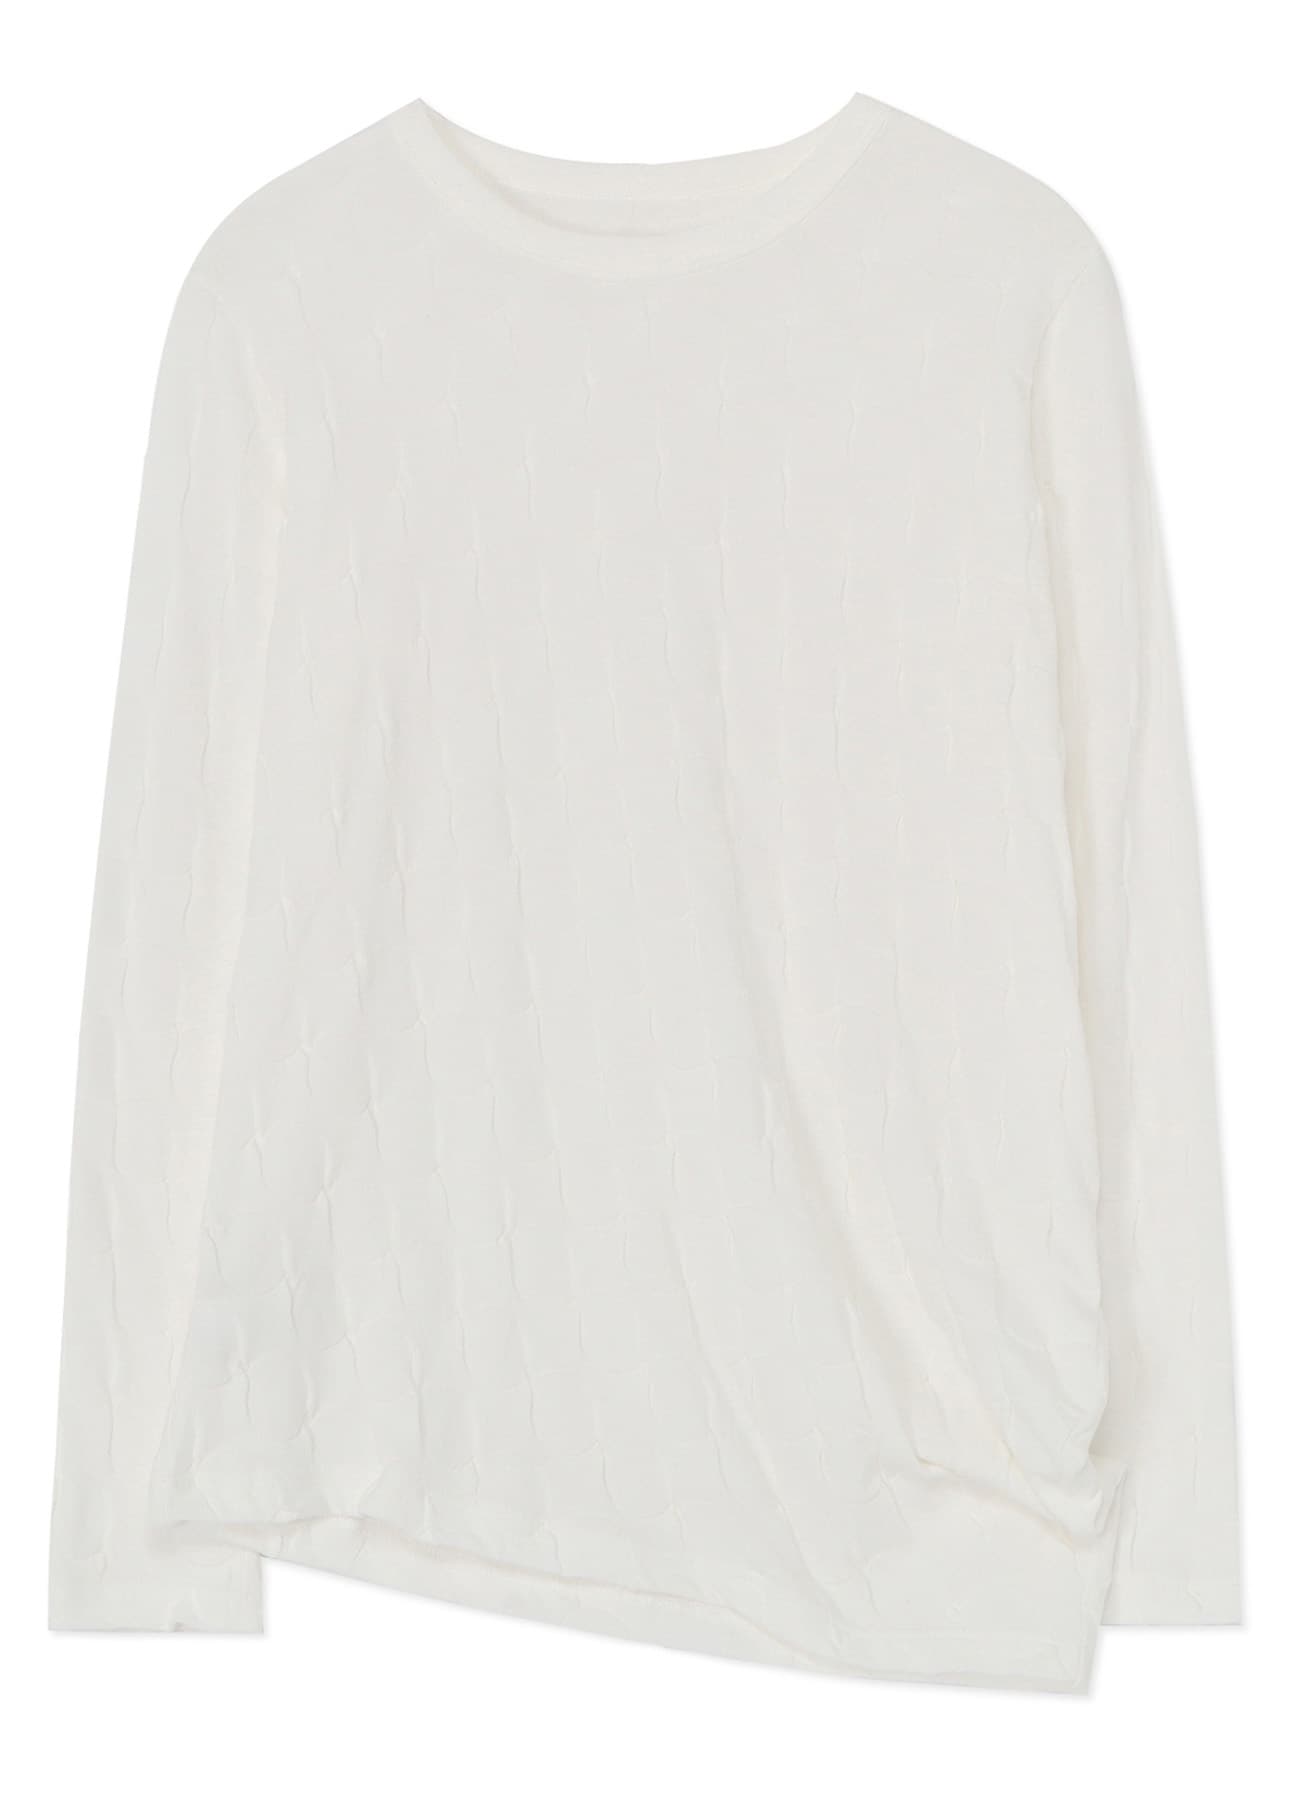 POLKA DOT LINKS ROUNDNECK CRUNCHED SIDE T-SHIRT(S Off White): Y's 